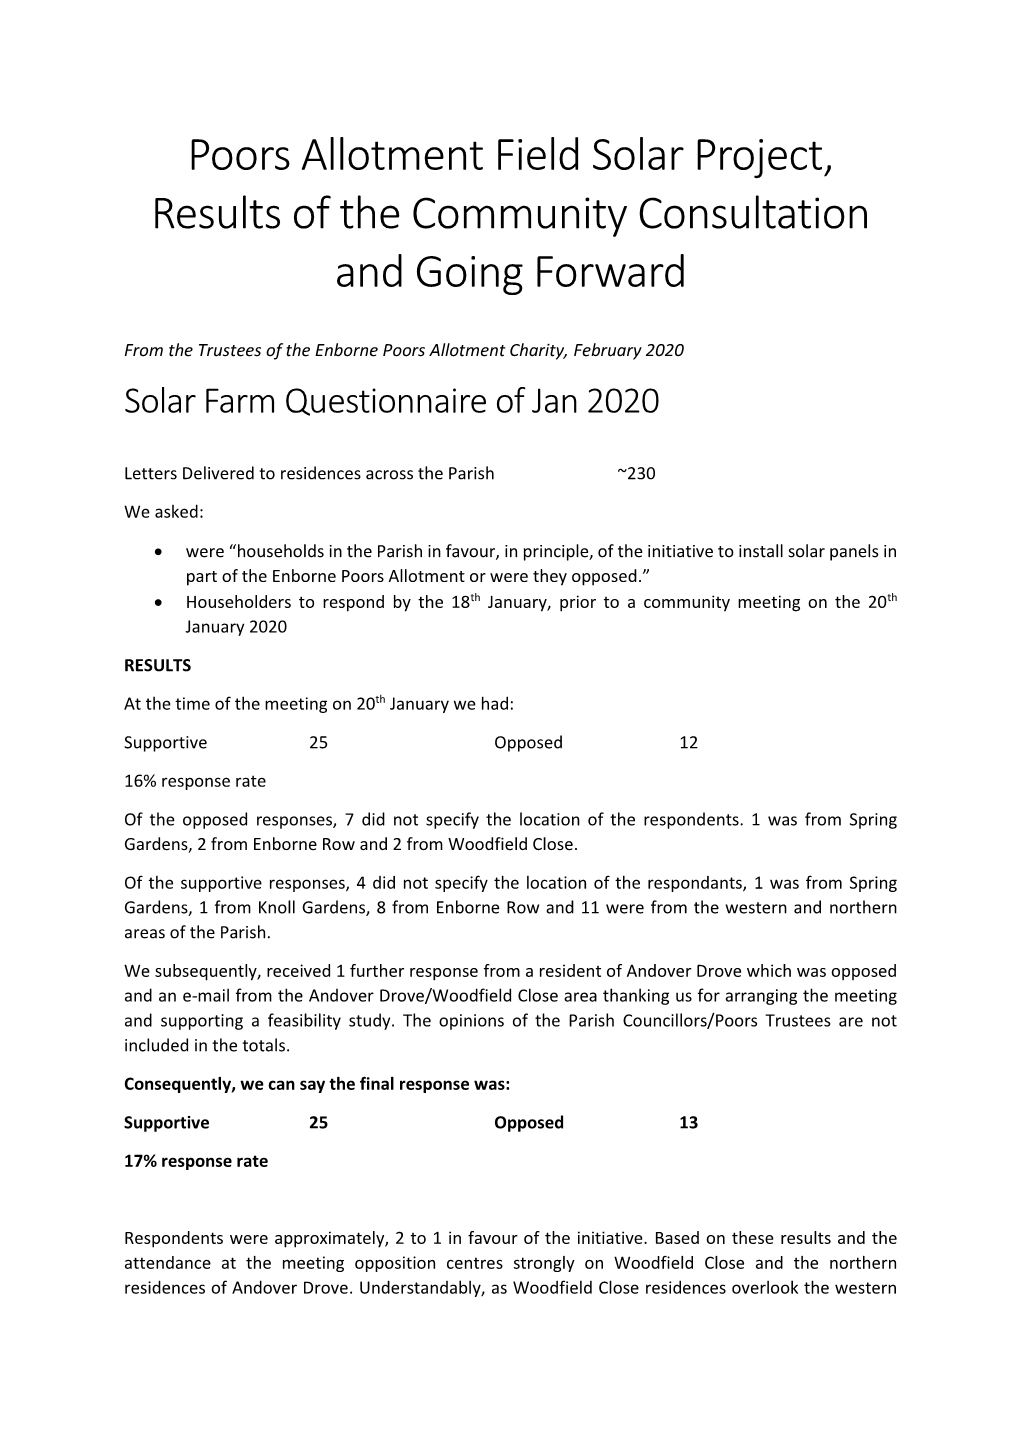 Poors Allotment Field Solar Project, Results of the Community Consultation and Going Forward